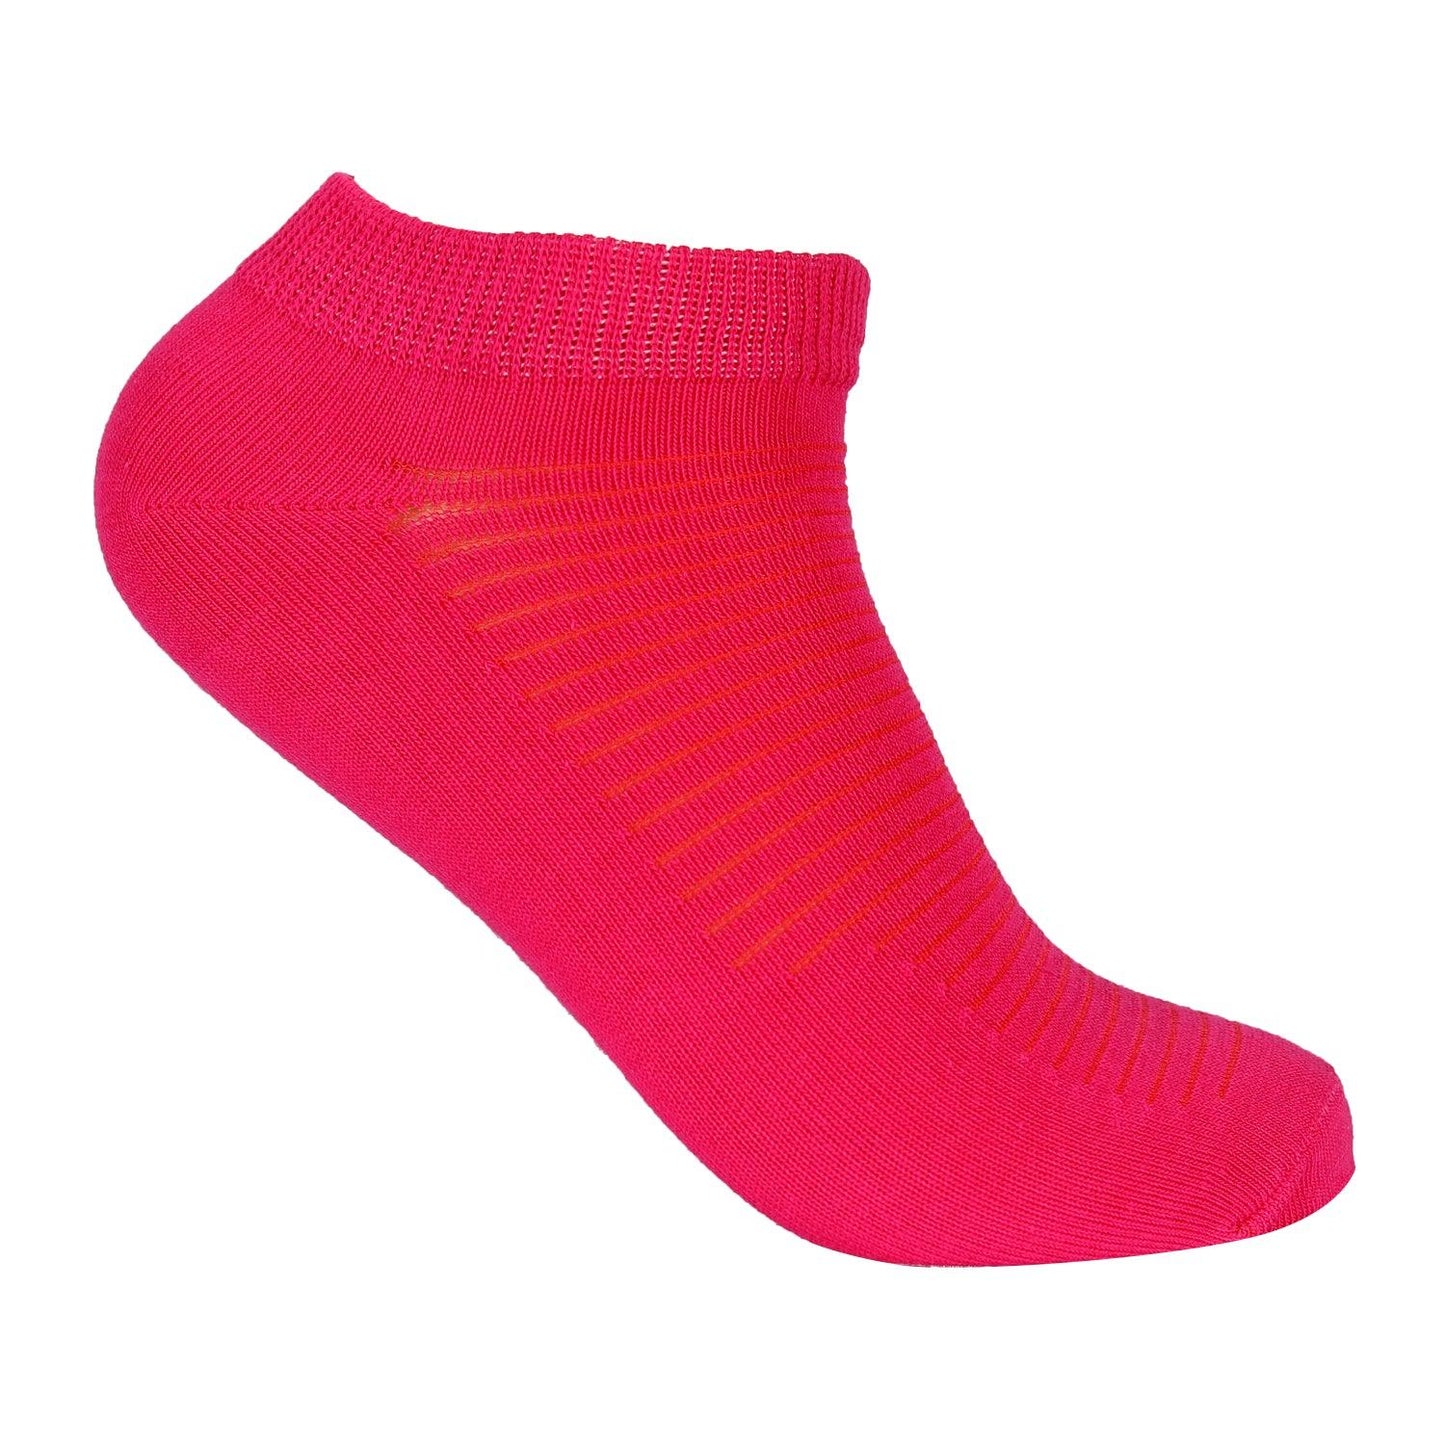 ACTIV WOMEN SOCKS PACKAGE *3 - COLORS A-922 Activ Abou Alaa